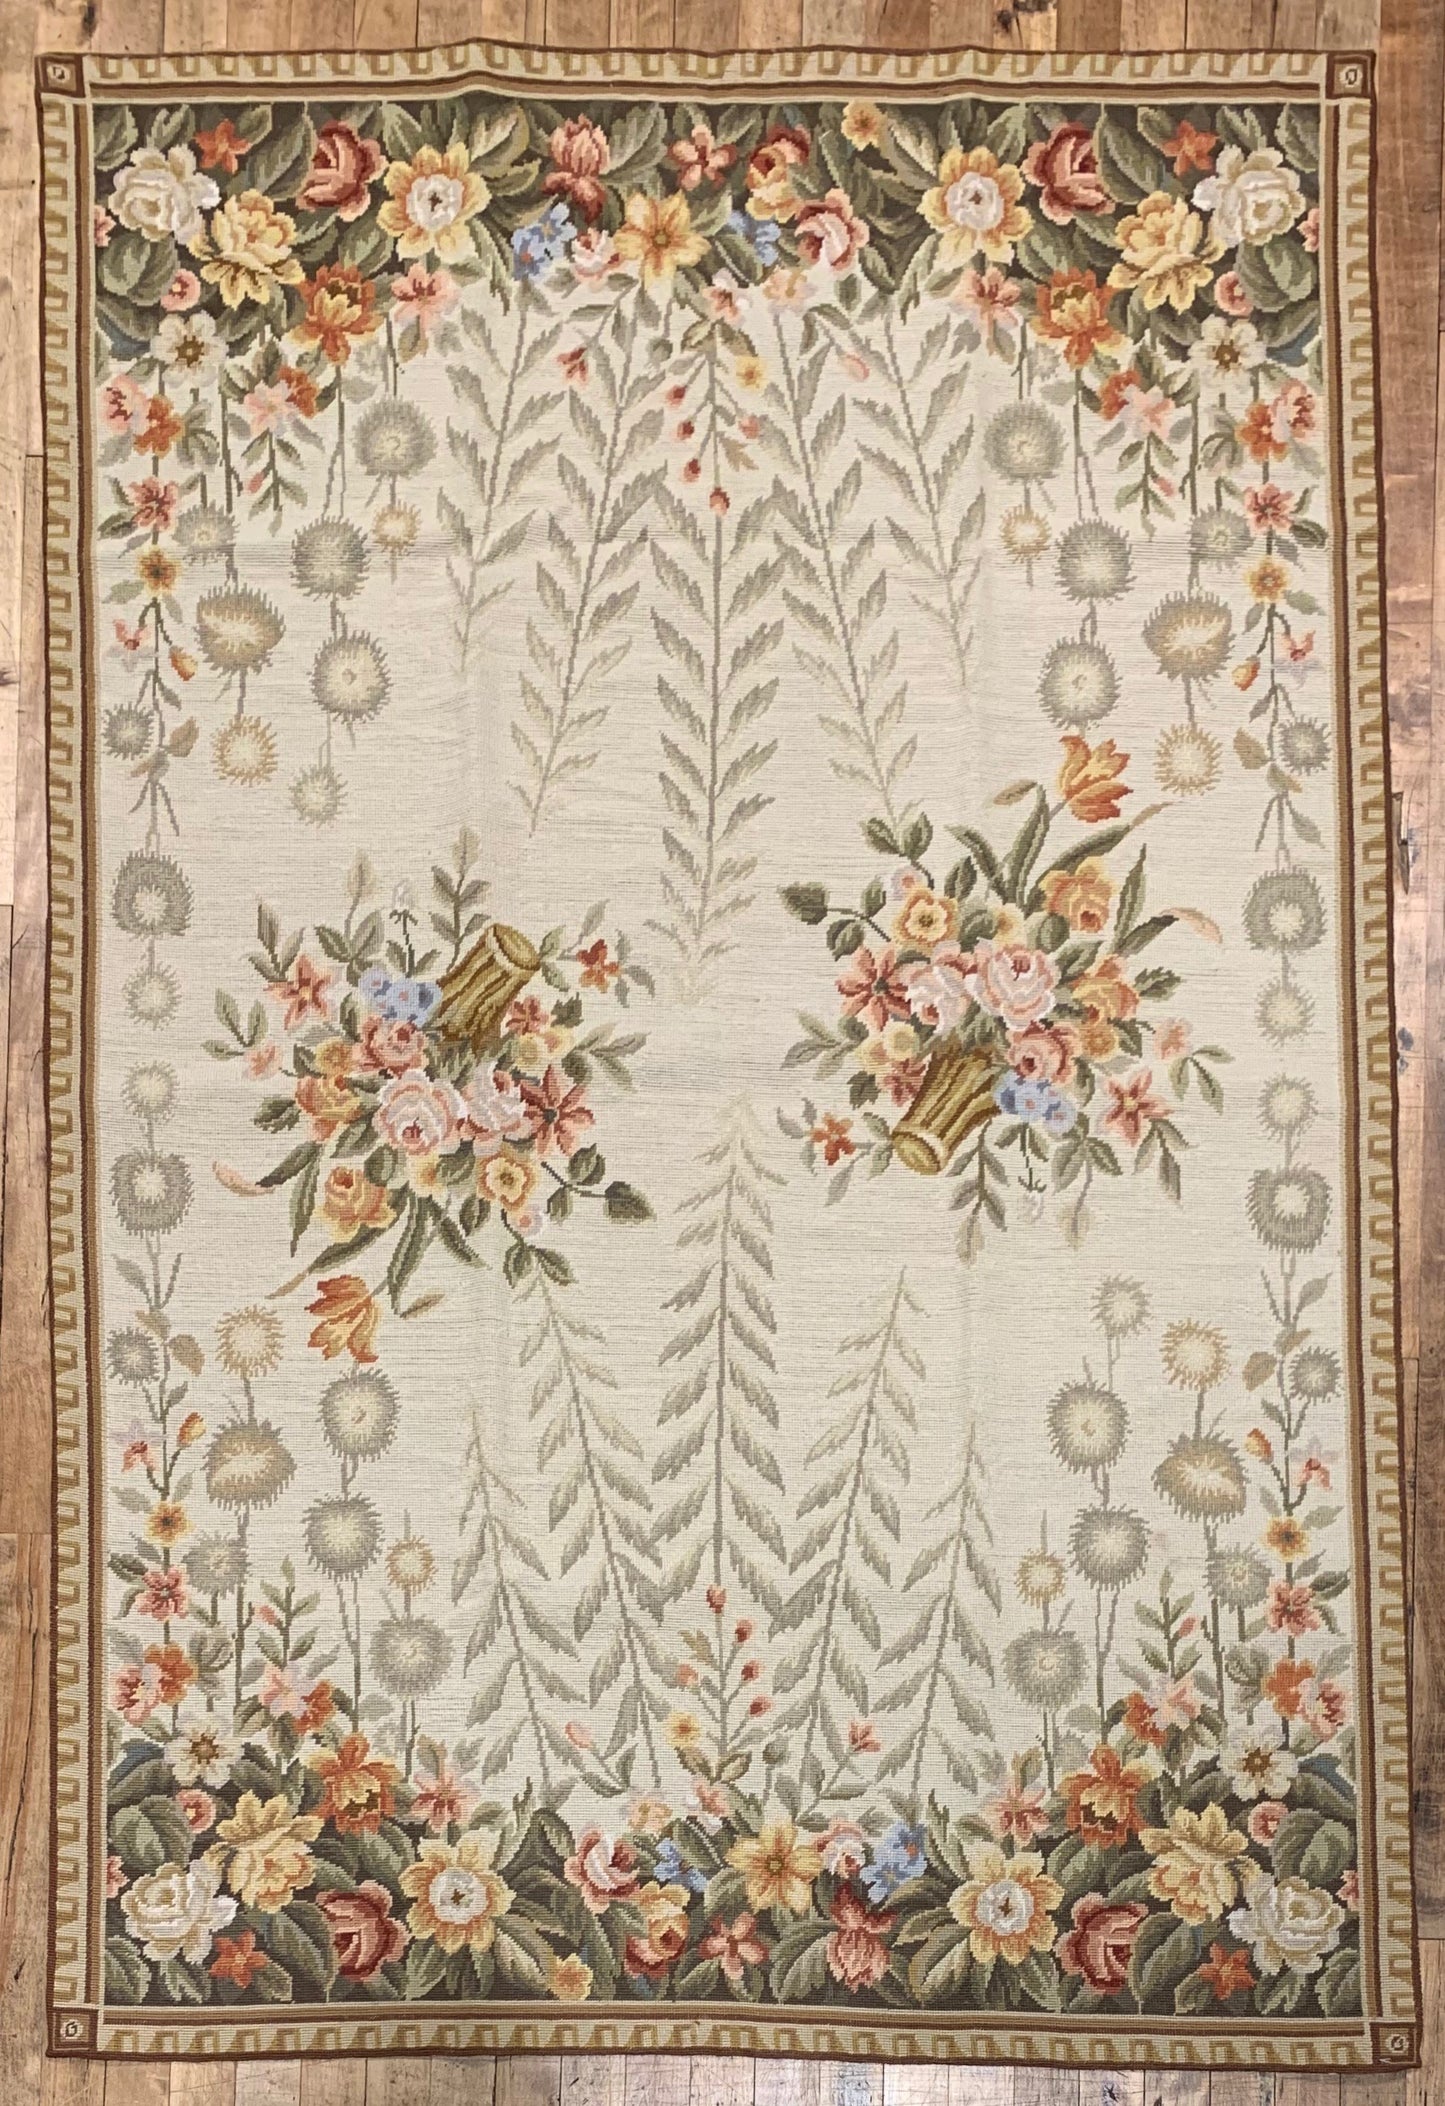 Chinese Floral Needlepoint